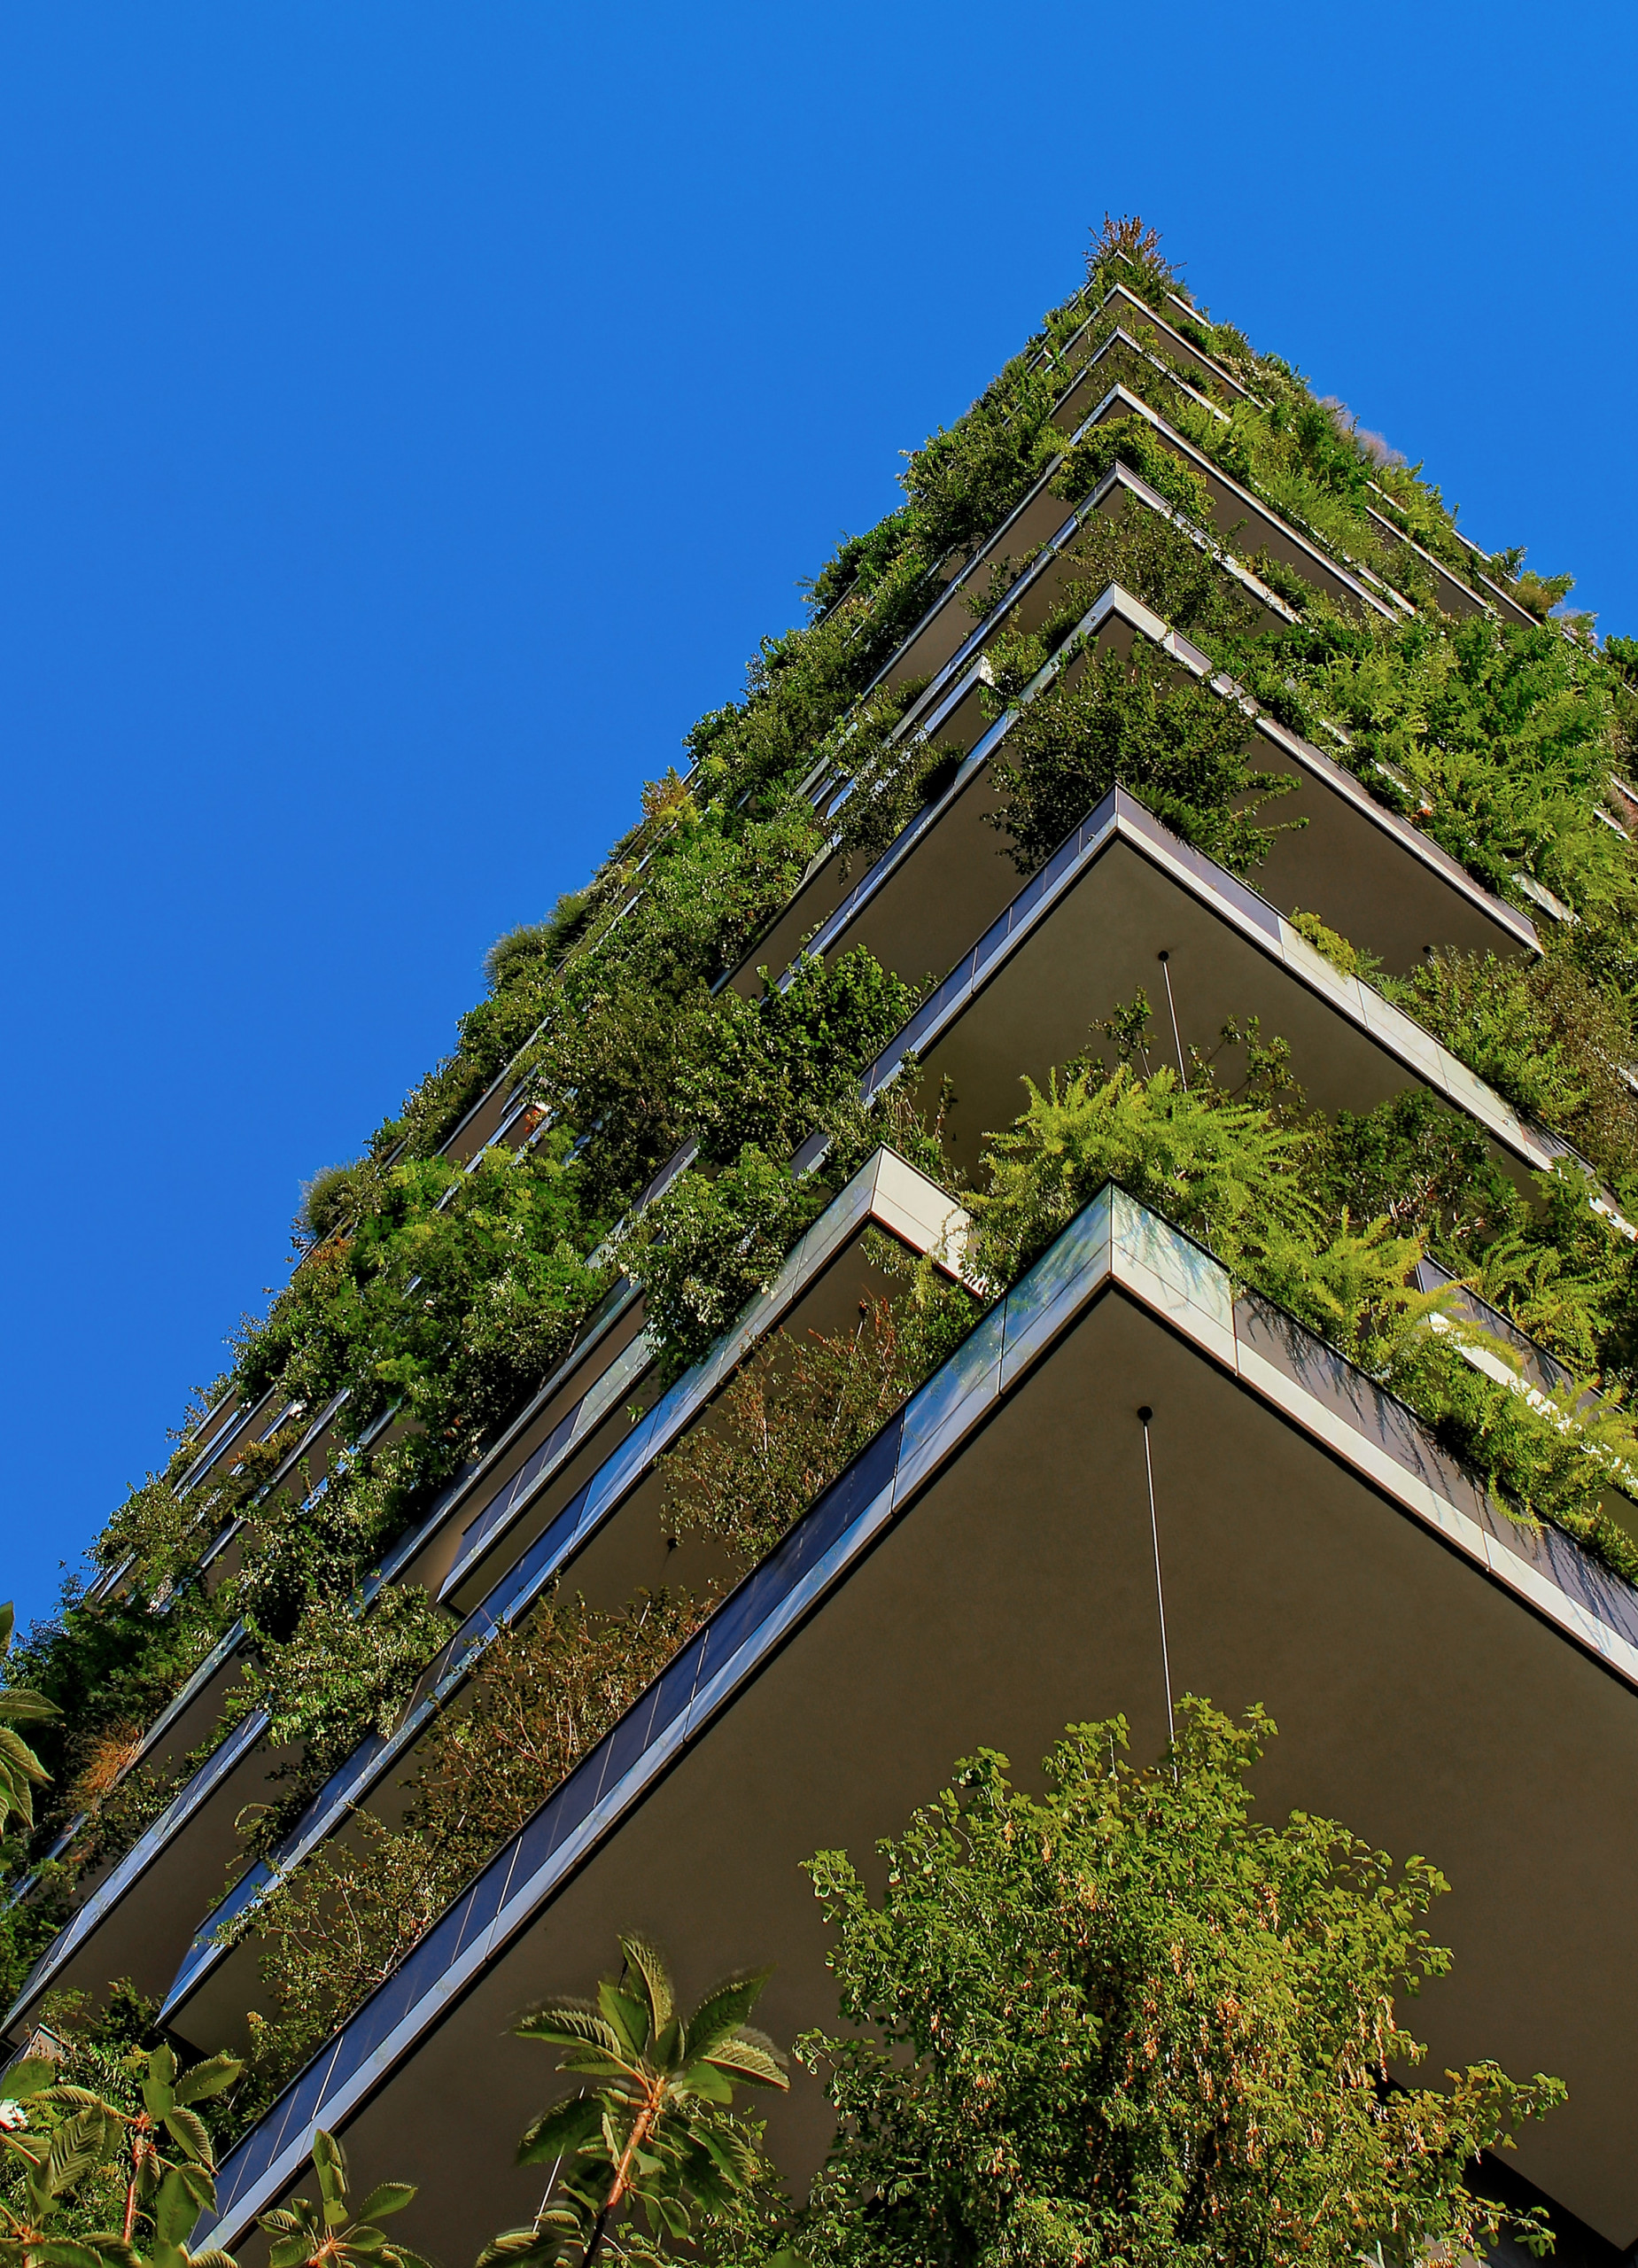 4 Surprising Health and Financial Benefits of Green Buildings